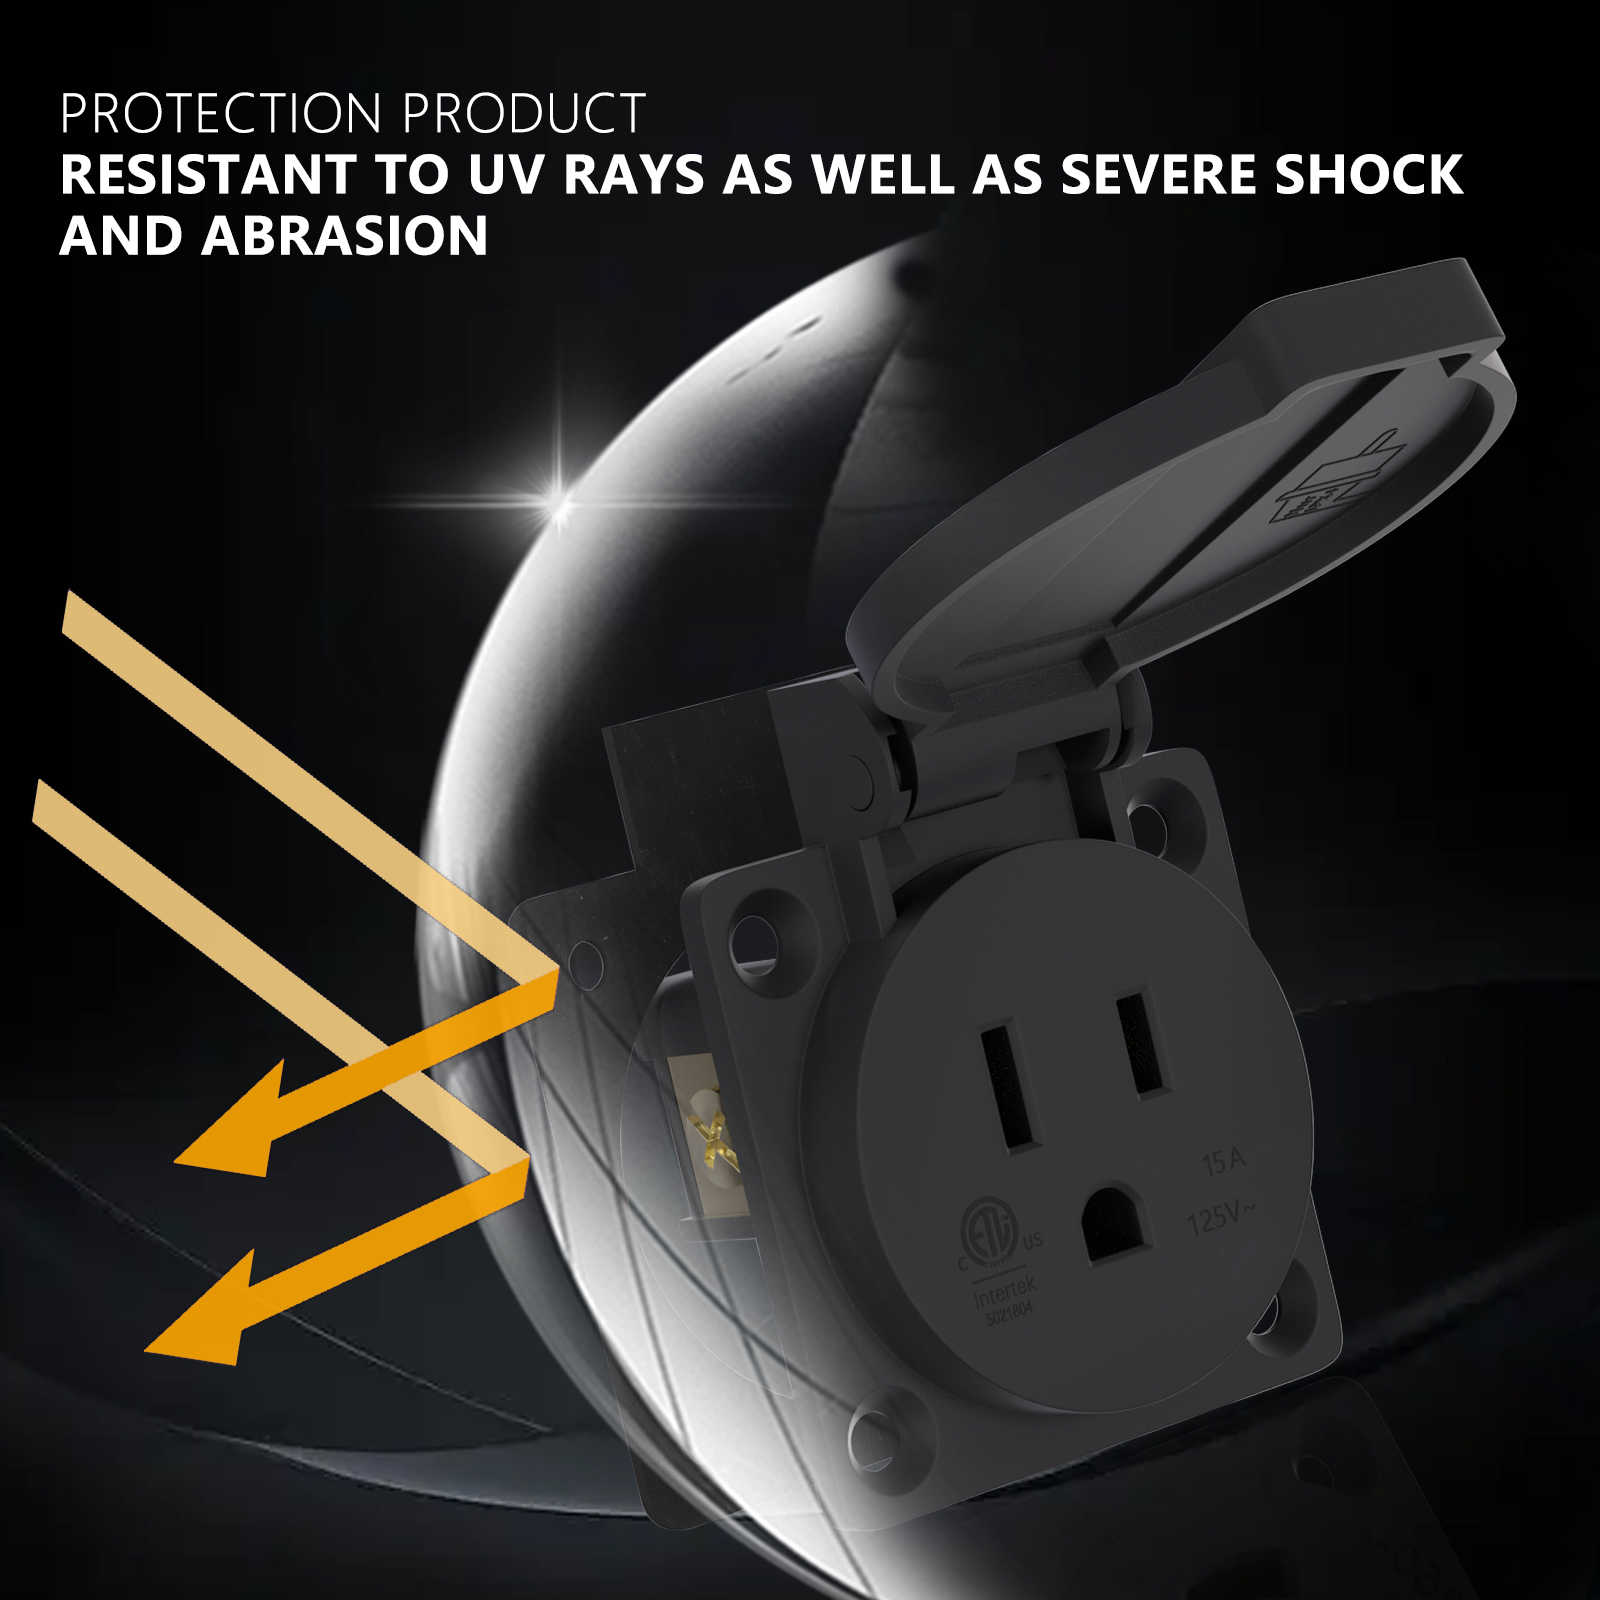 The power outlet receptacle with cover has strong protective ability